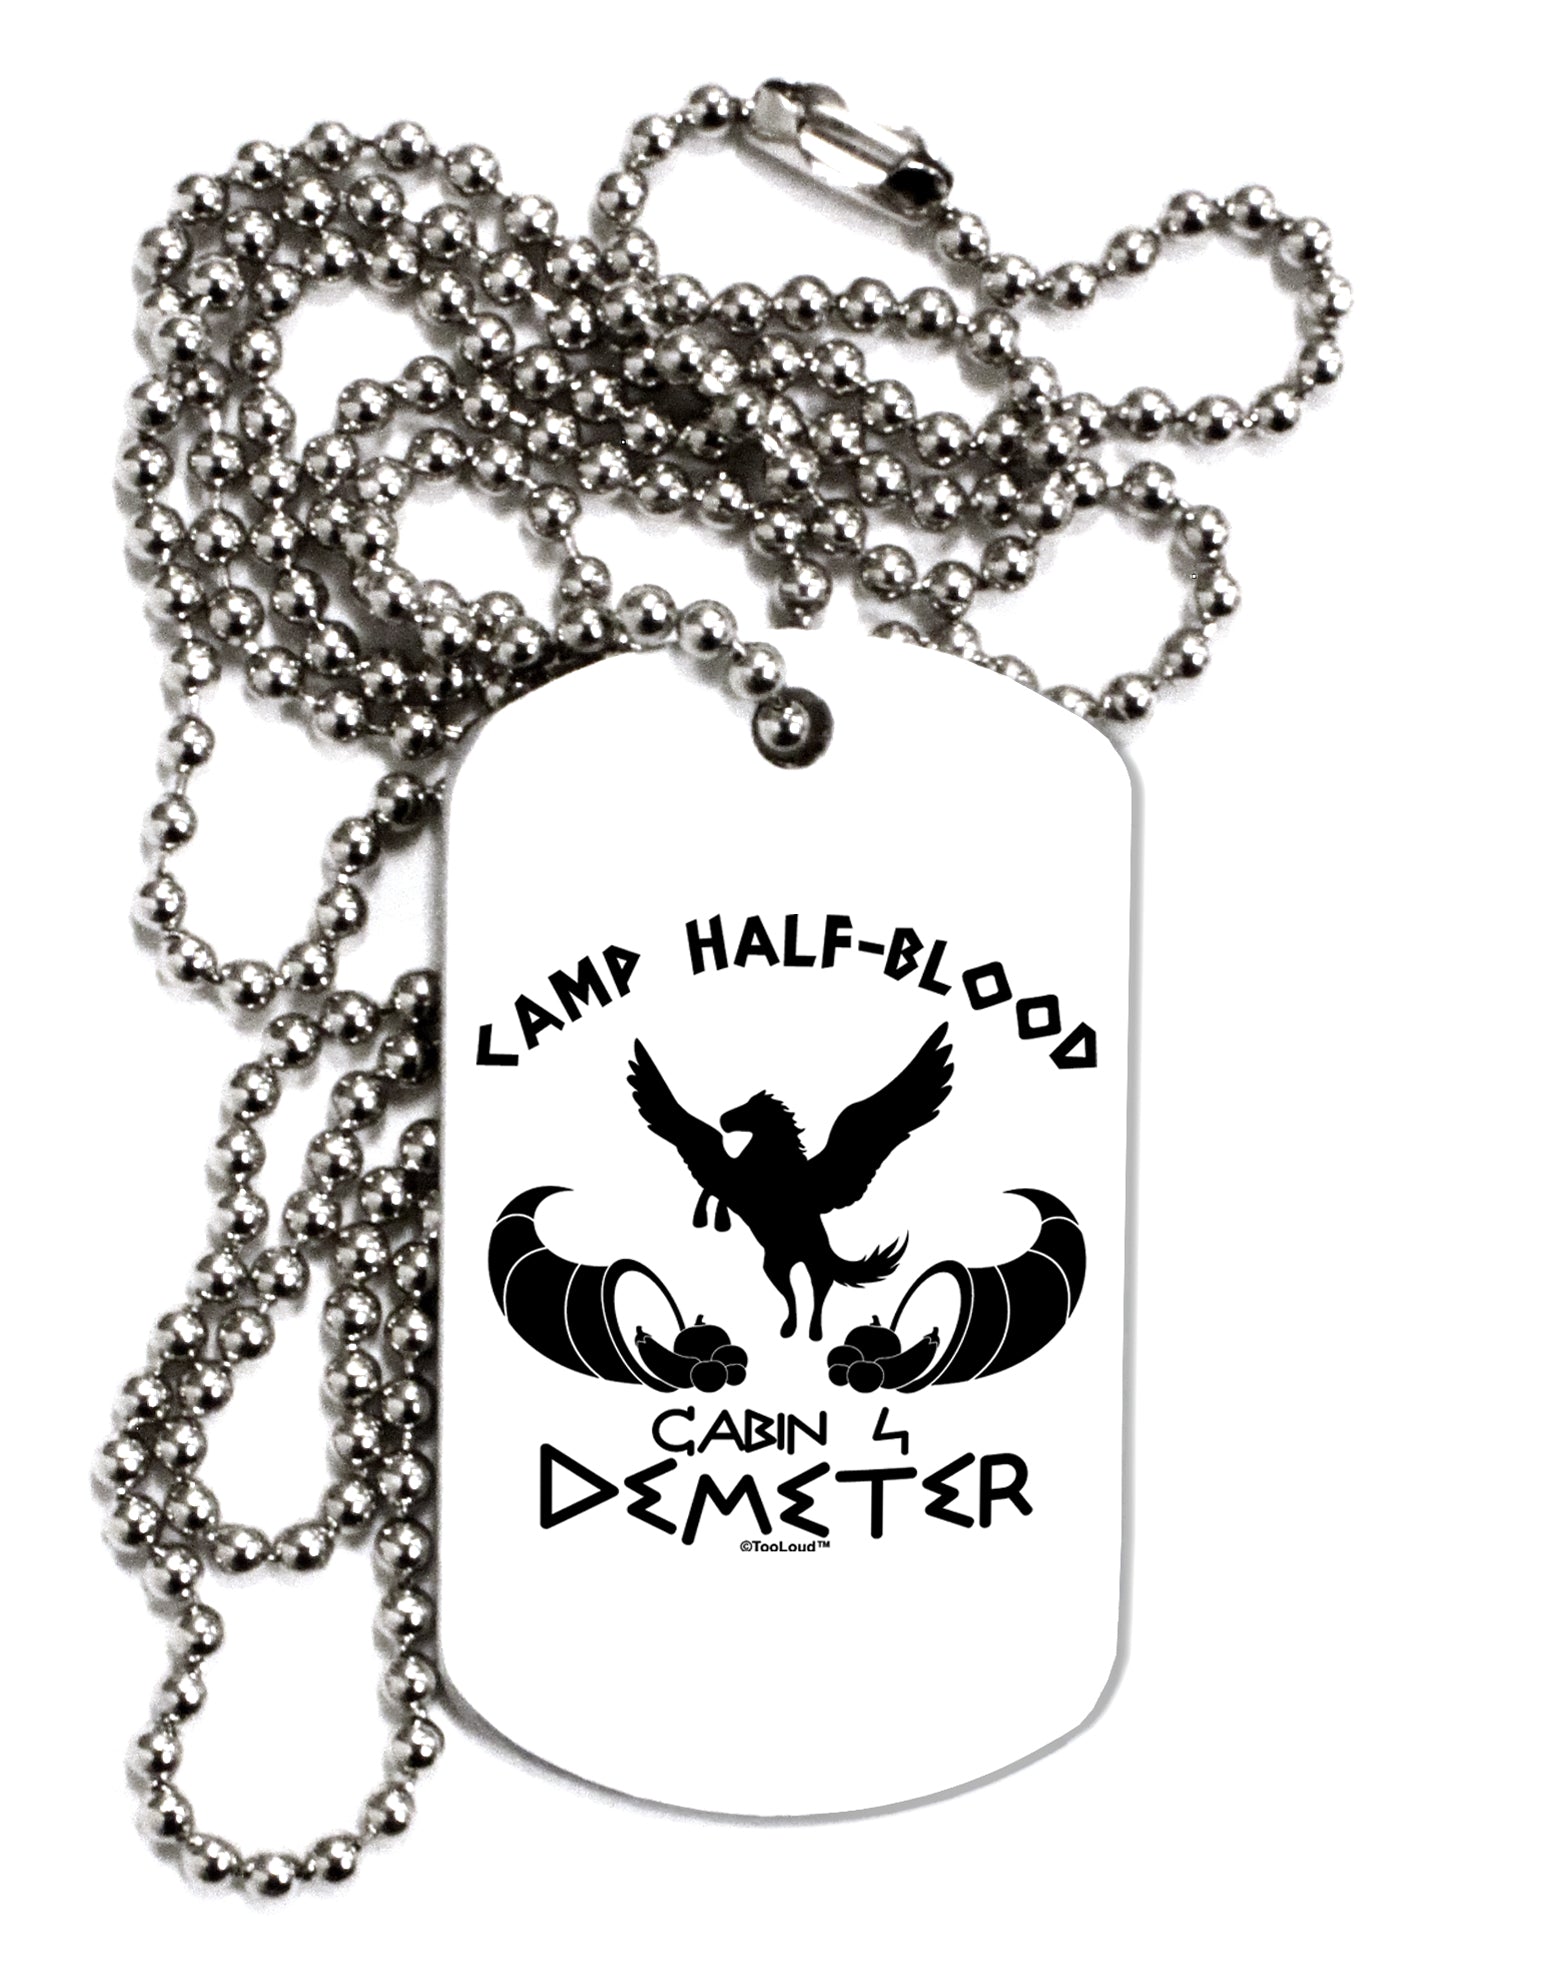 Annabeth Chase's Necklace, Camp Half-blood, Percy Jackson Book - Etsy